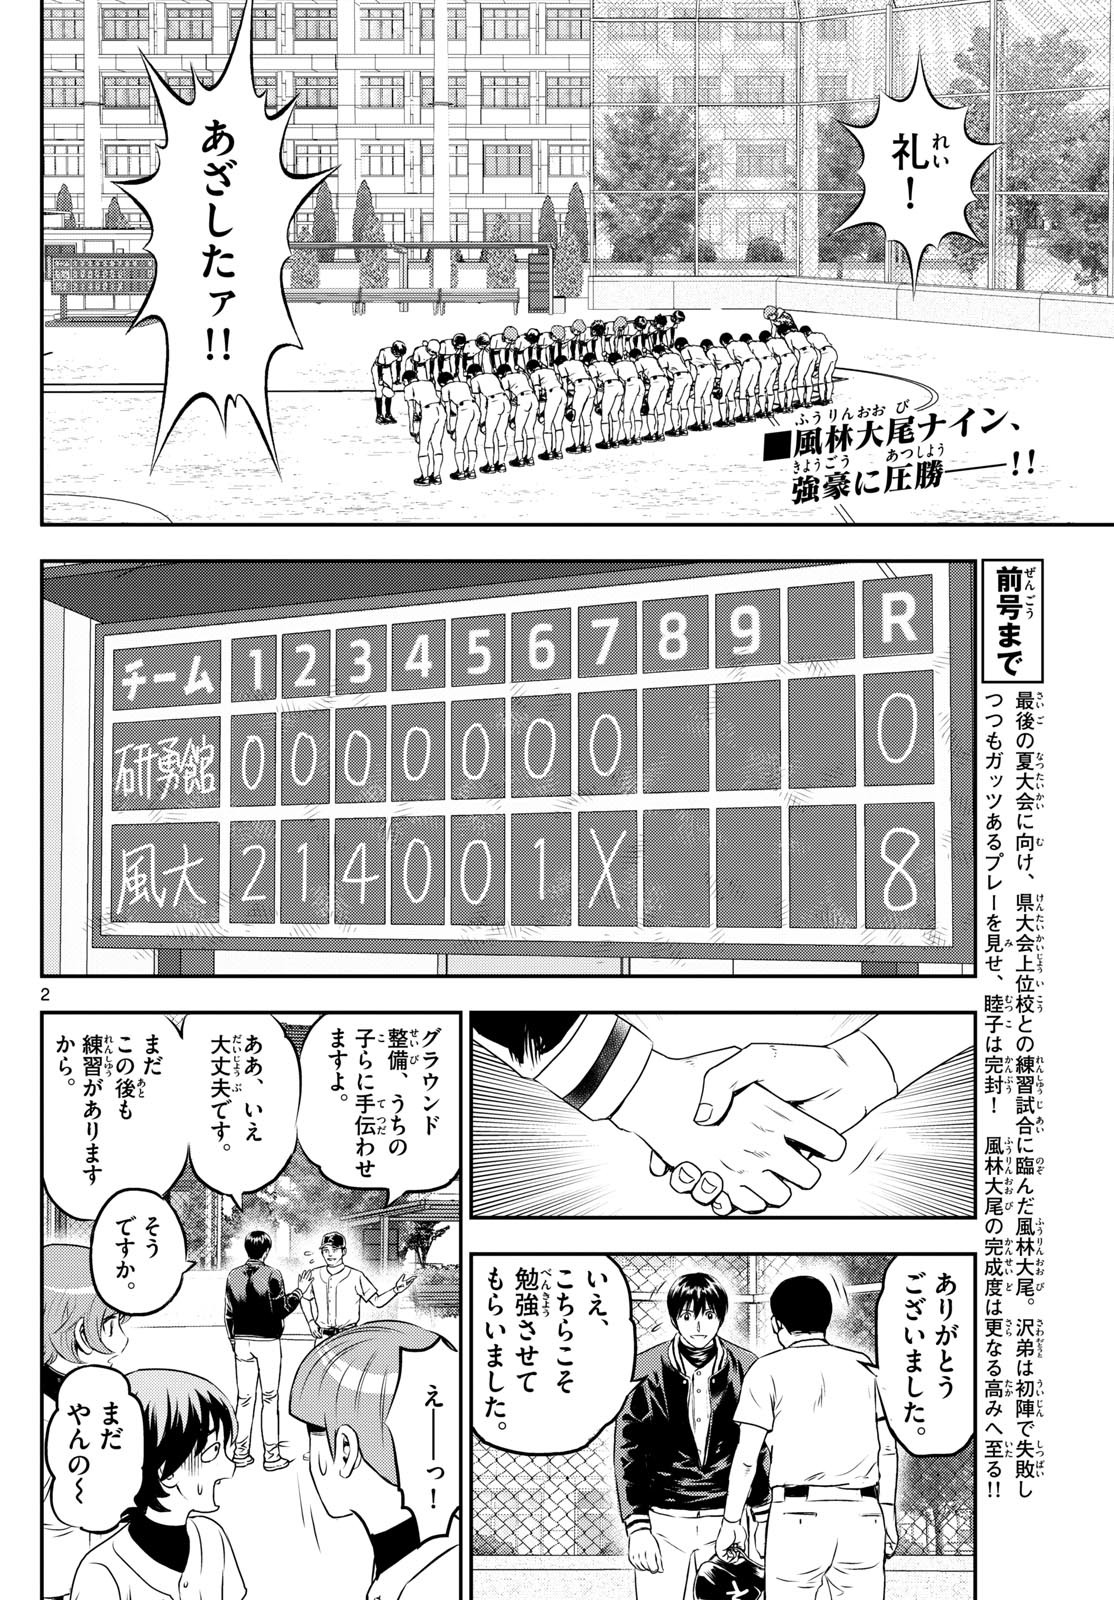 Major 2nd - メジャーセカンド - Chapter 258 - Page 2